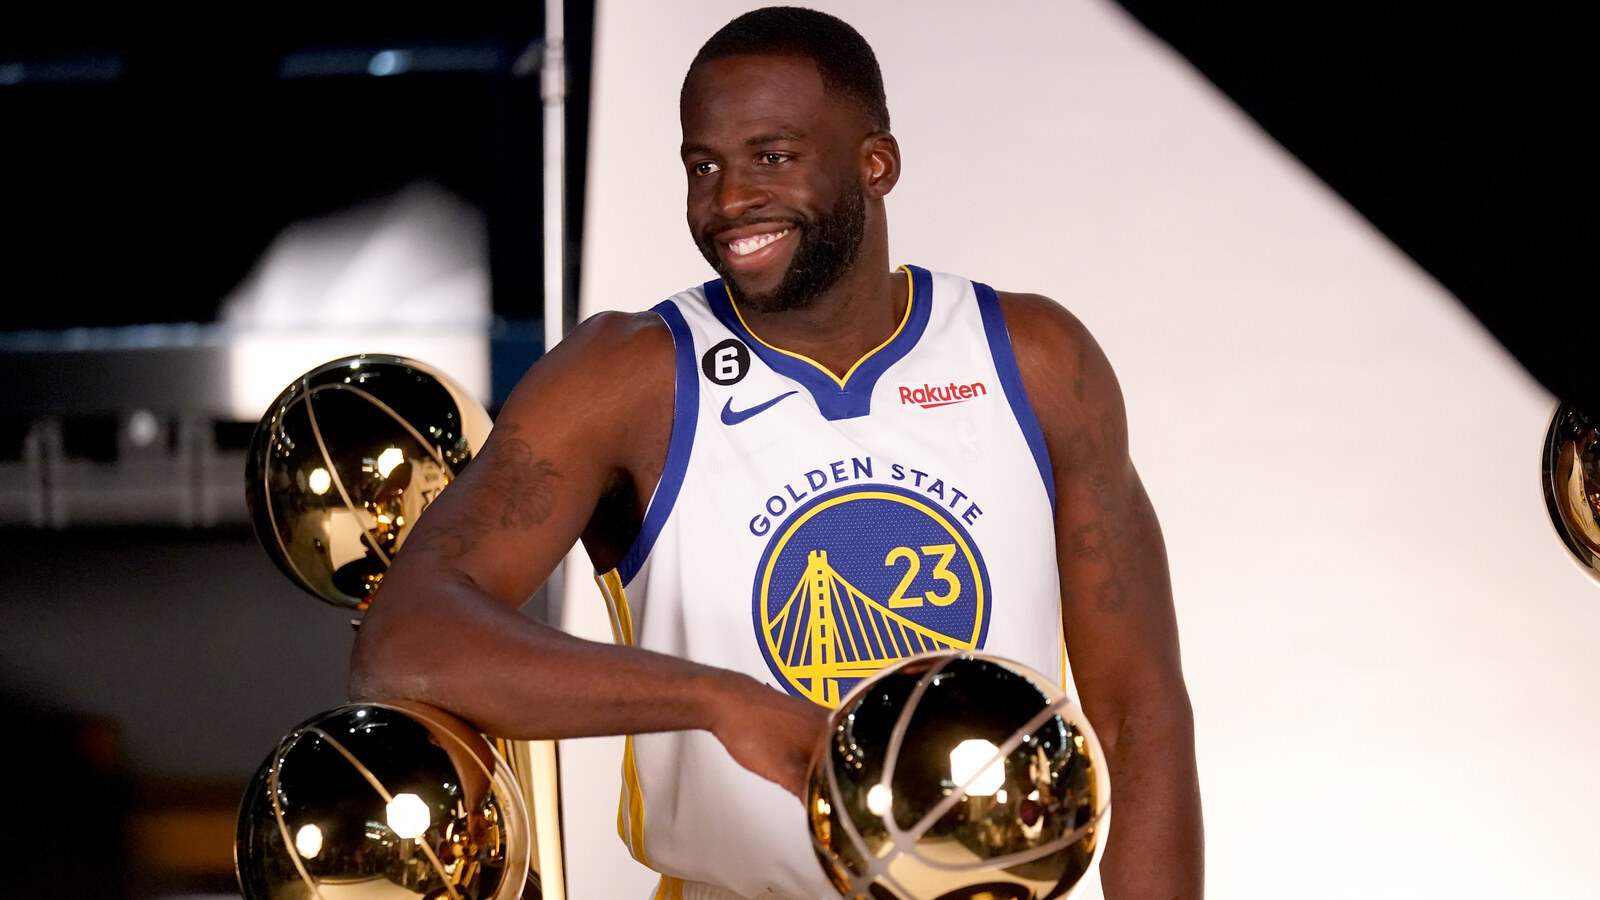 Bill Simmons Says A Monster 3-Team Trade That Would Send Draymond Green To The Lakers Is Not Inconceivable: "Everyone Says The Final Season With Kevin Durant Was A Profoundly Unhappy Season. I Don’t Think They Wanna Go Through That Again..